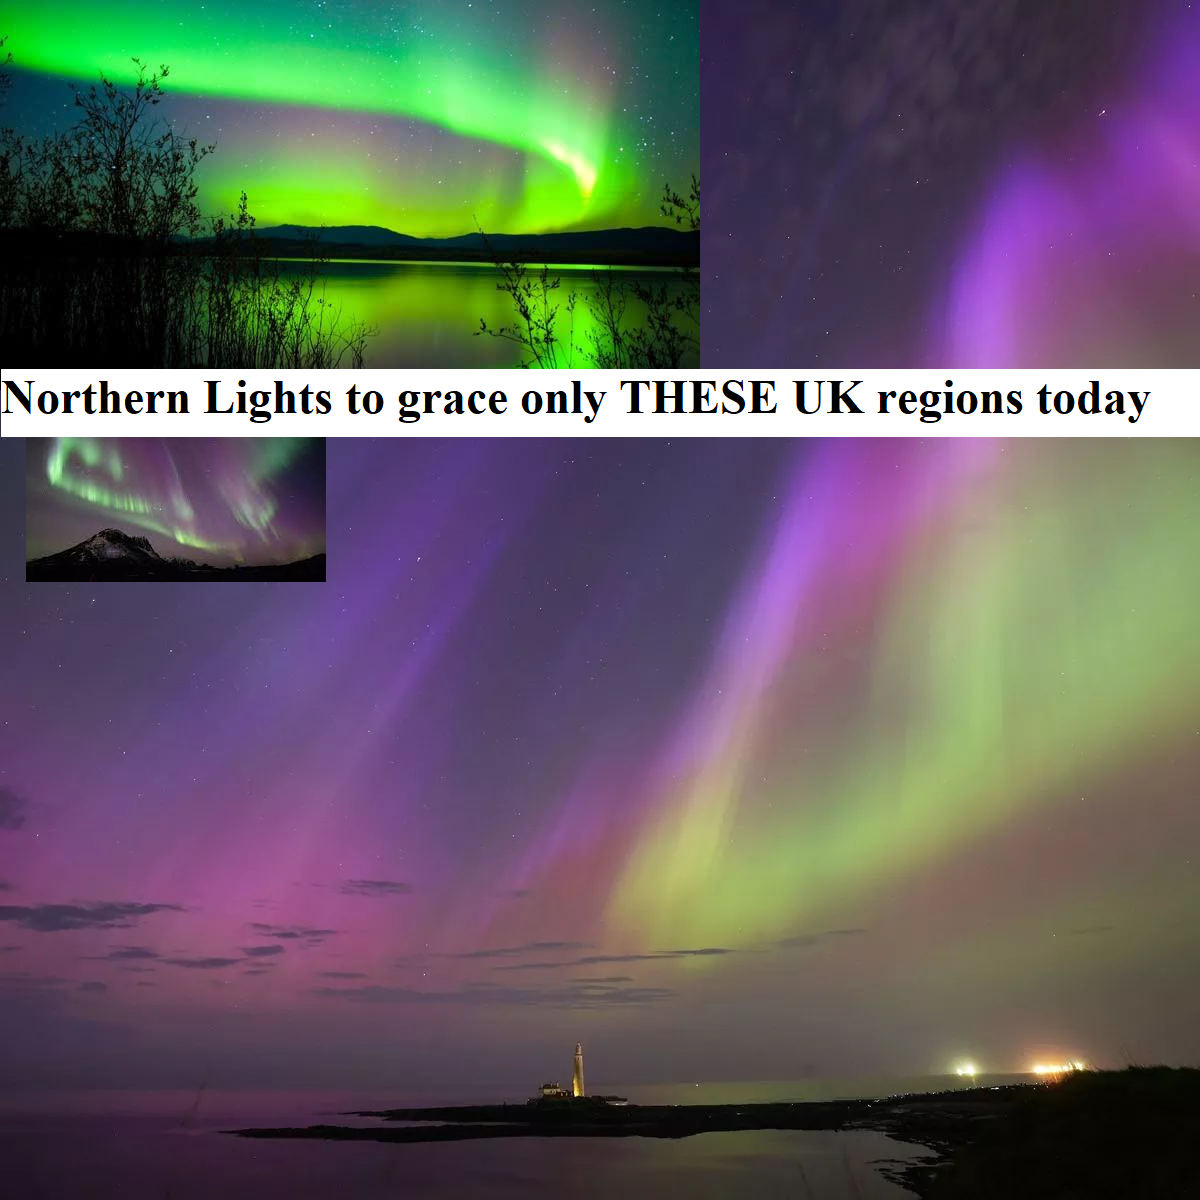 Northern Lights to grace only THESE UK regions today